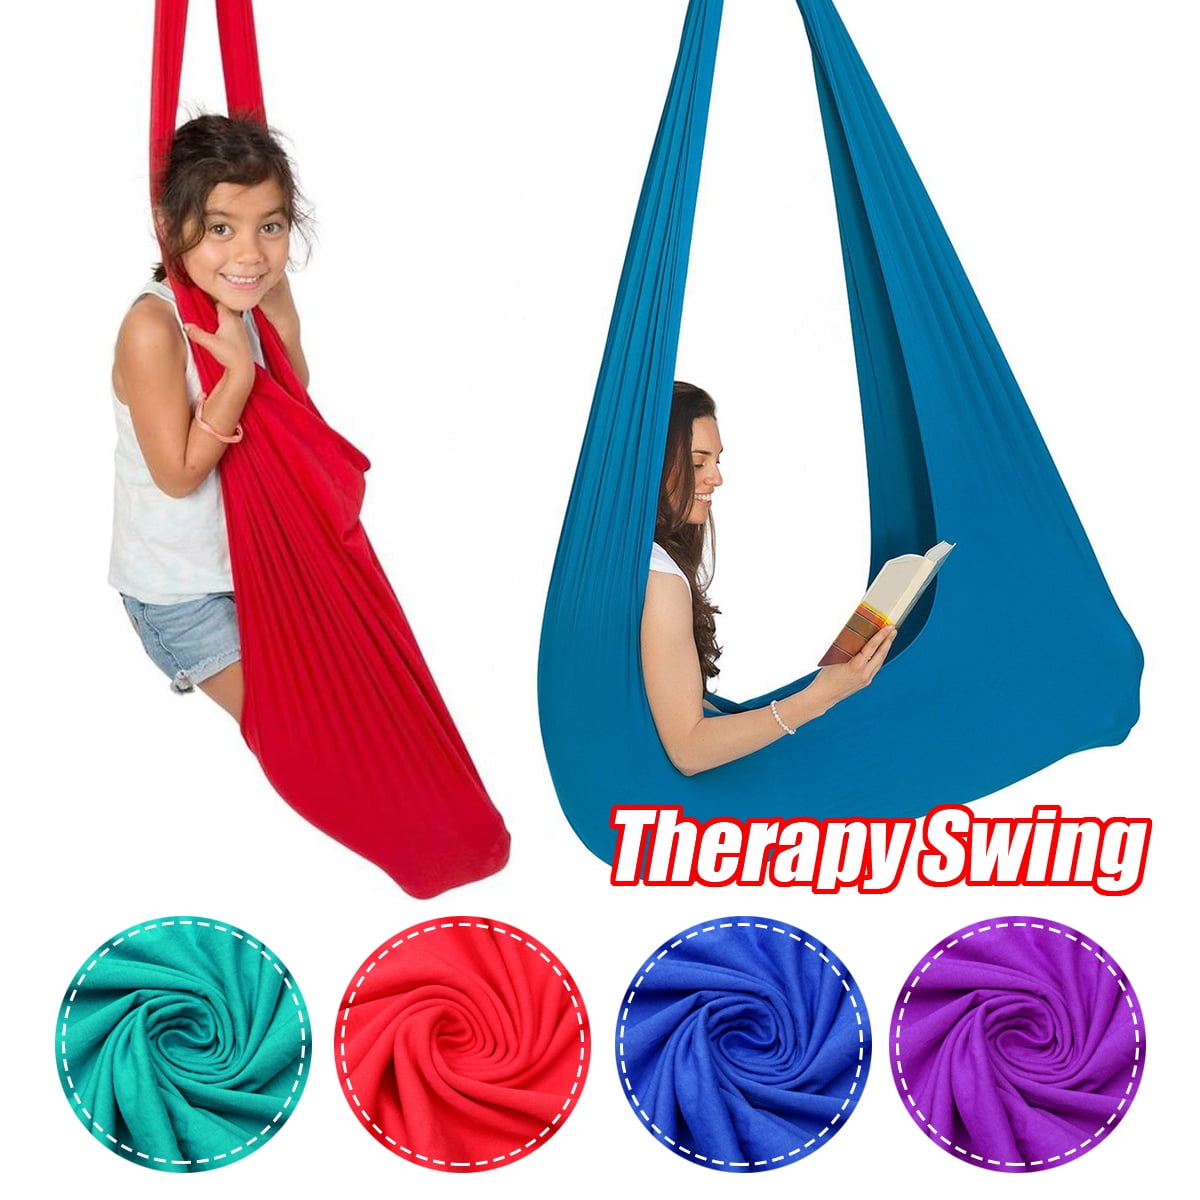 Details about   Kids Therapy Swing Cuddle Hanging Hammock with Autism ADHD Aspergers Sensory z